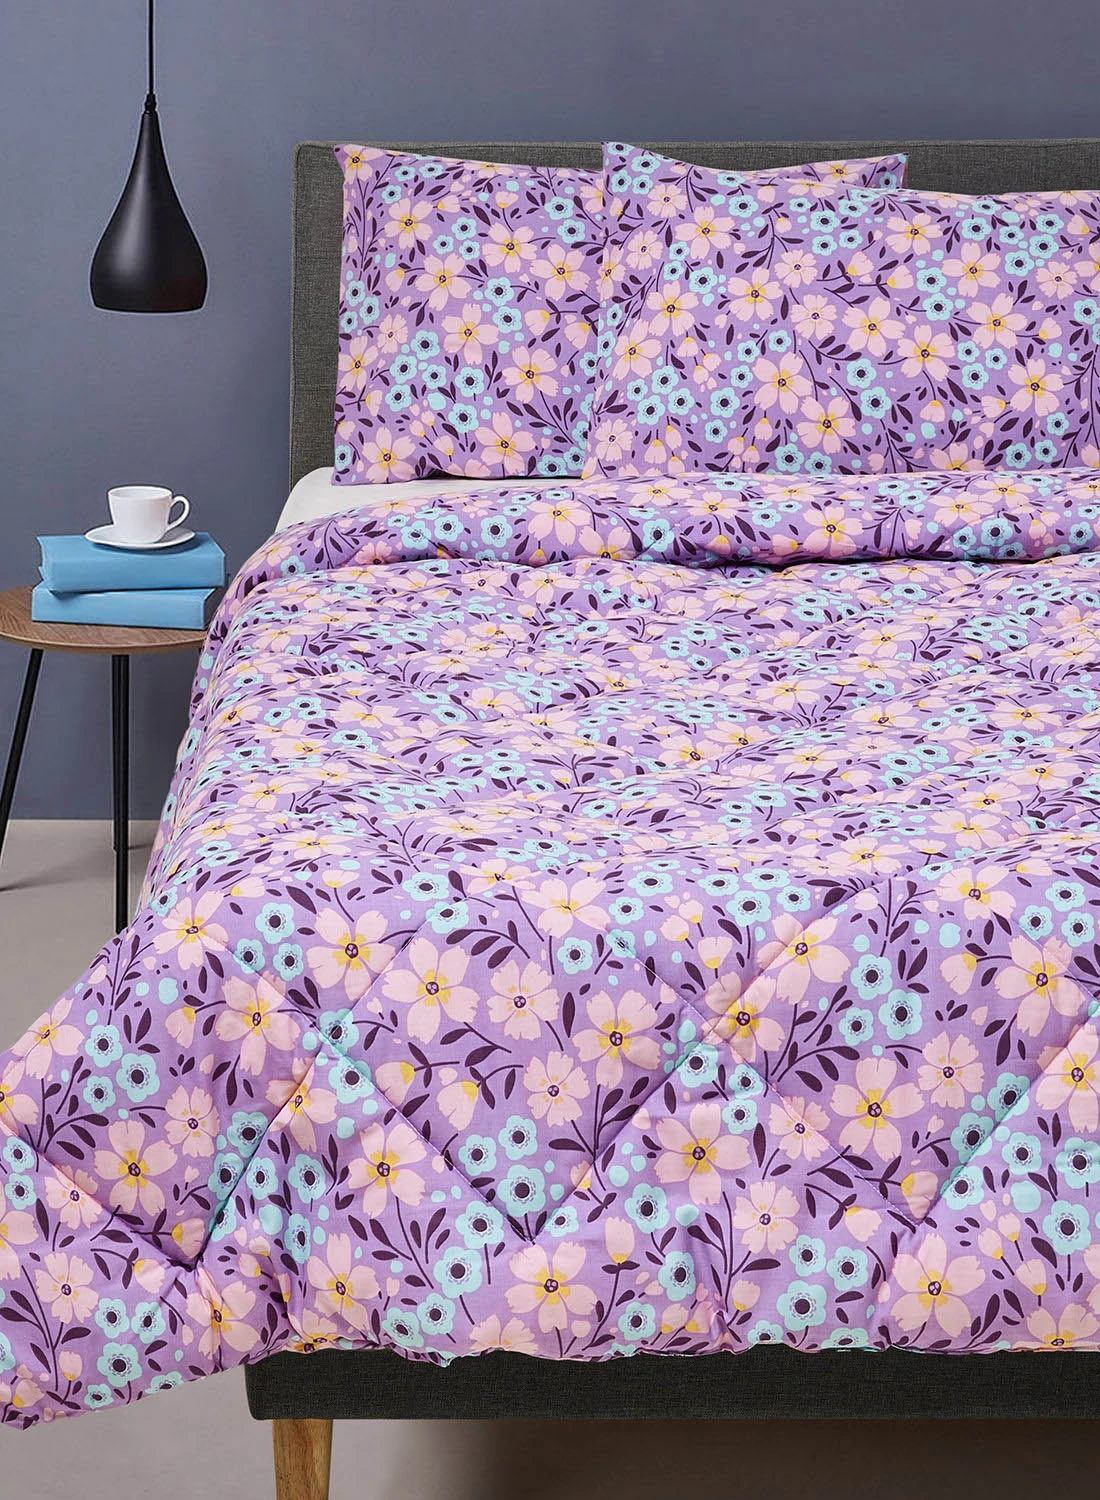 Amal Comforter Set King Size All Season Everyday Use Bedding Set 100% Cotton 3 Pieces 1 Comforter 2 Pillow Covers  Purple